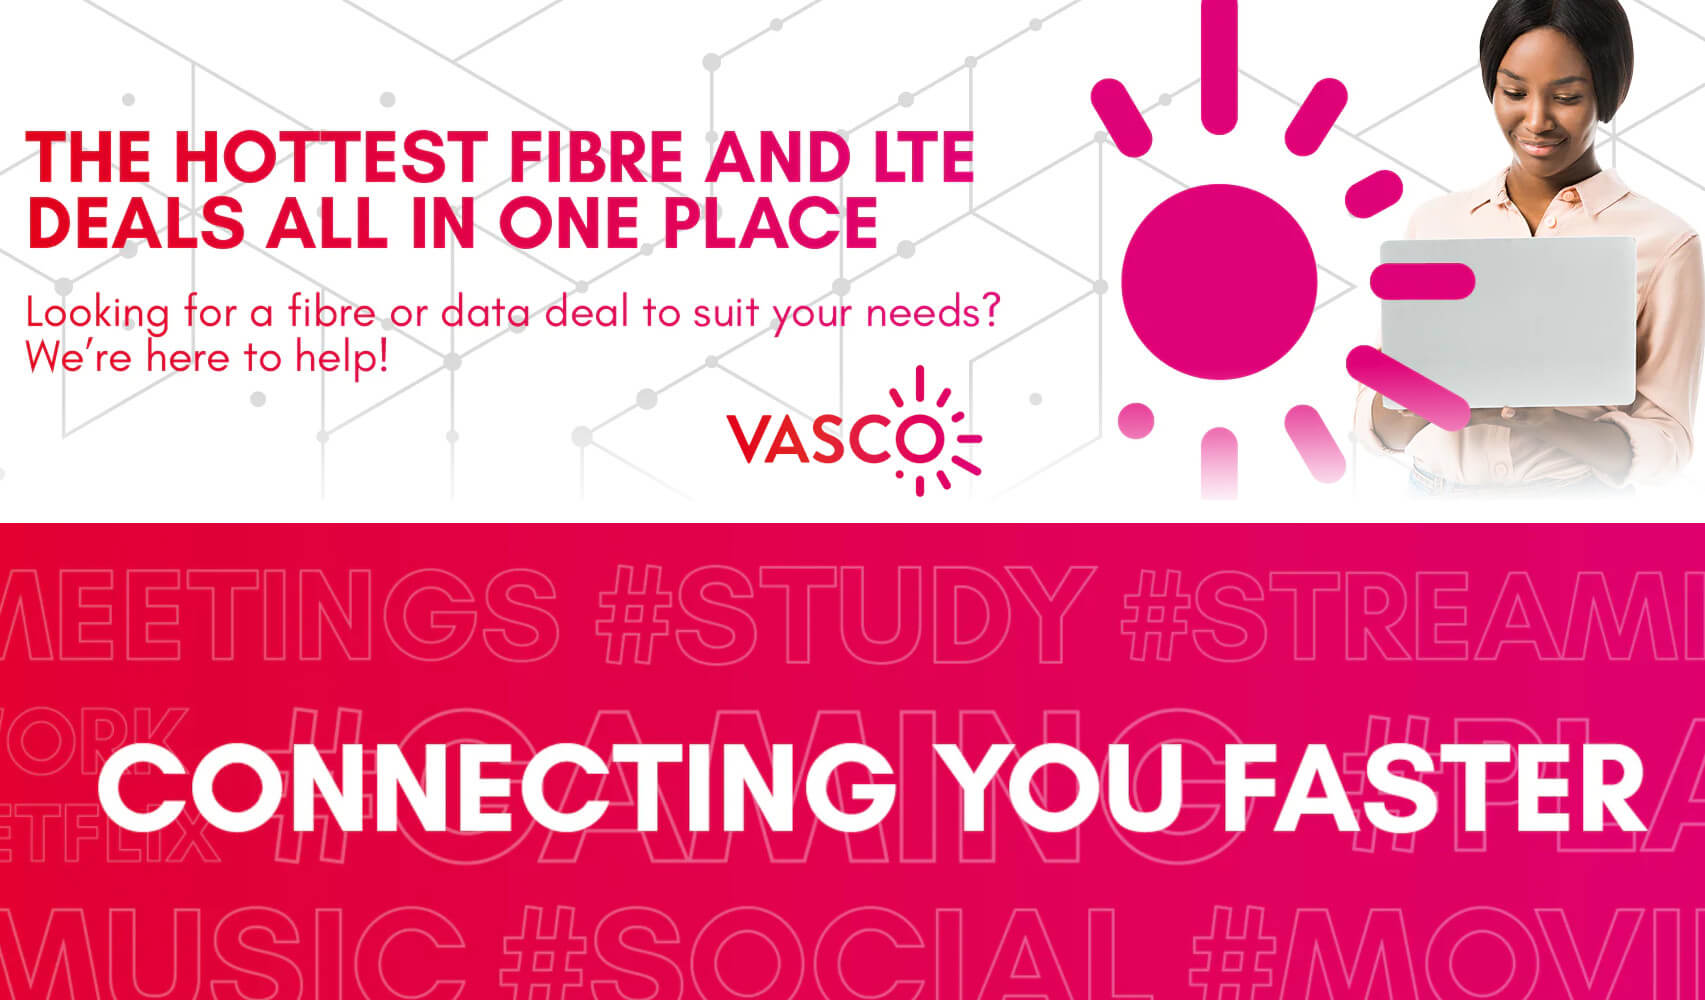 Why Choose Vasco Connect For Uncapped Fibre and Fast LTE?